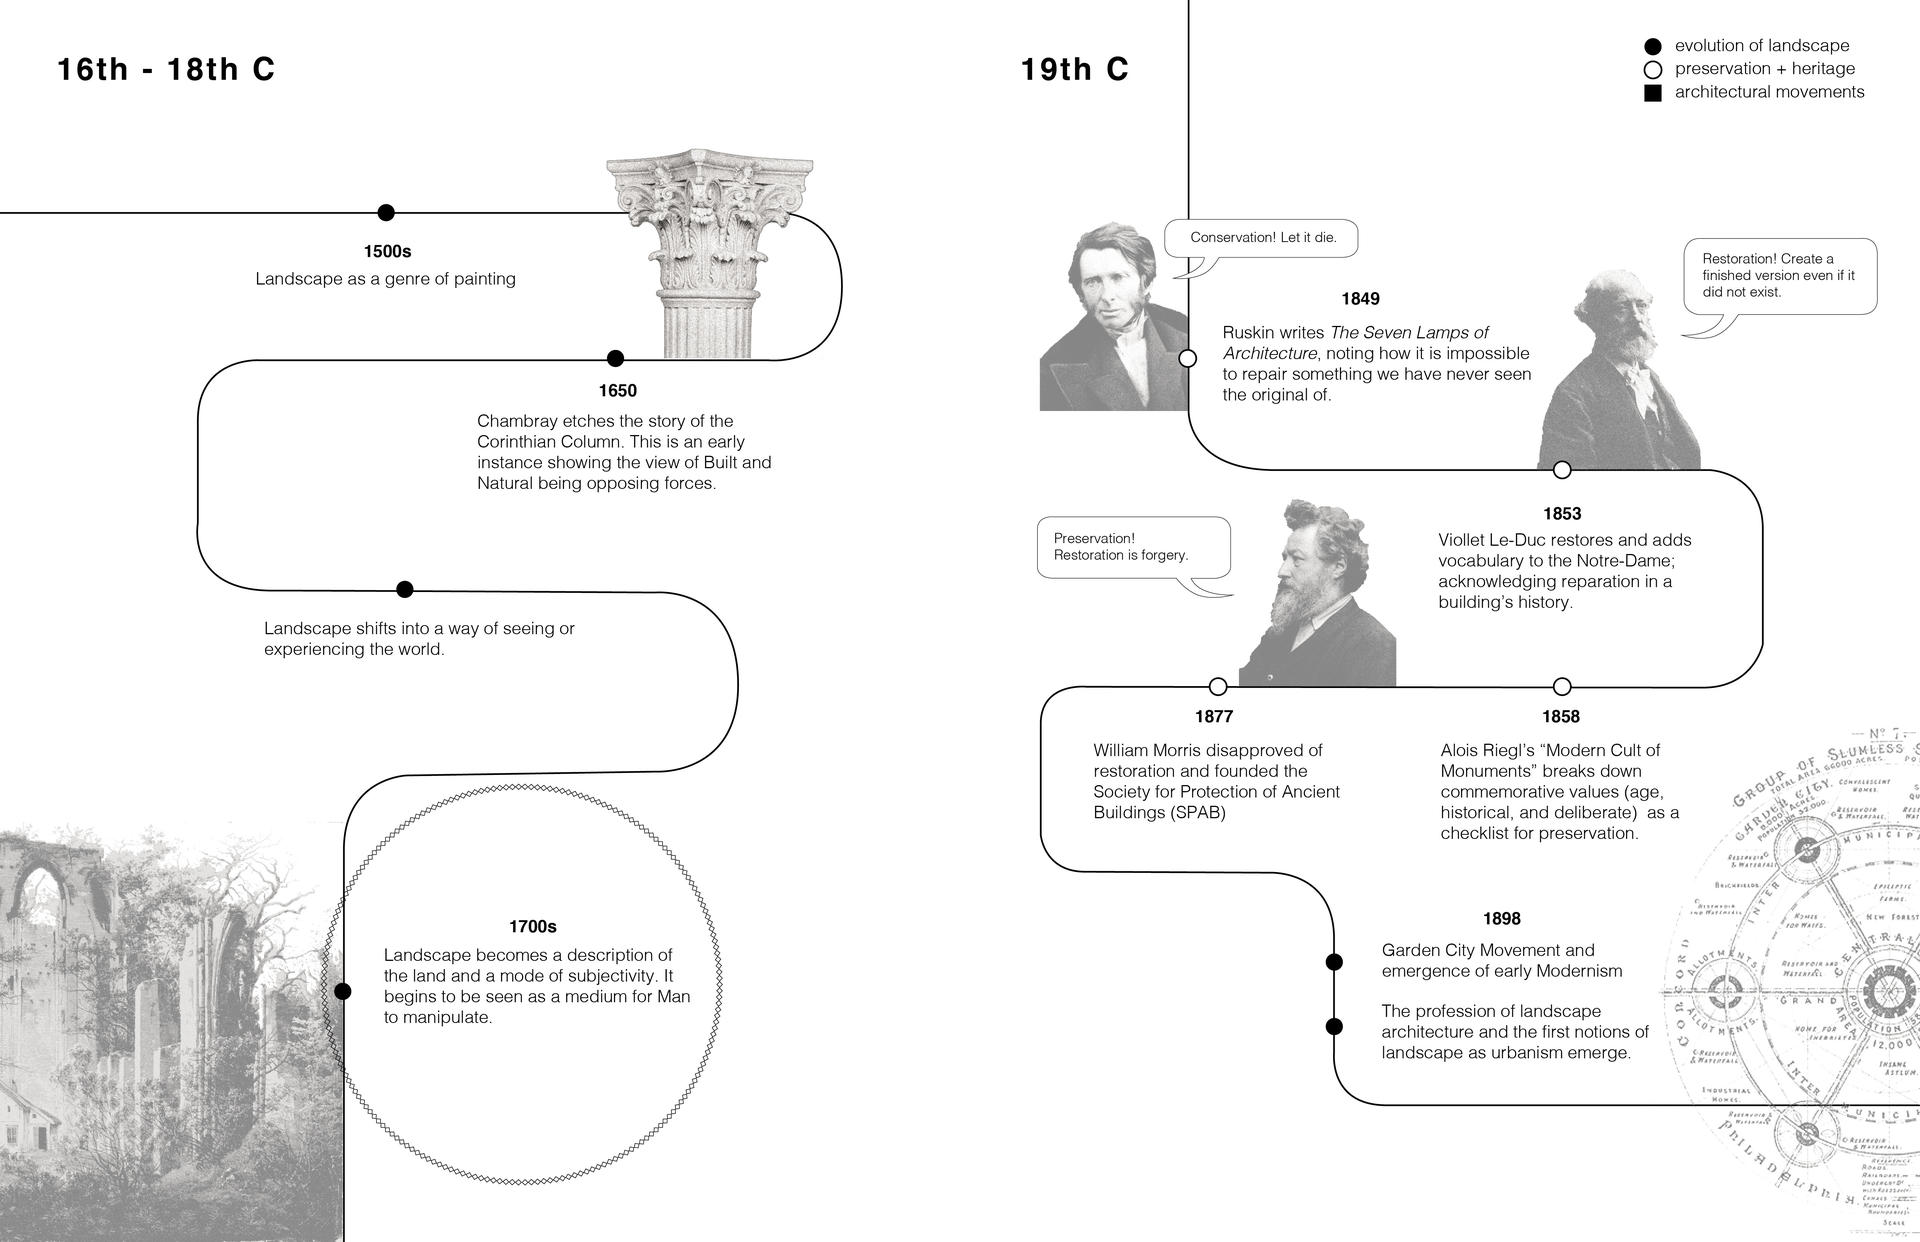 Timeline from 6th to 19th Century outlining major shifts in thought in relation to landscape, architecture, and preservation/heritage.